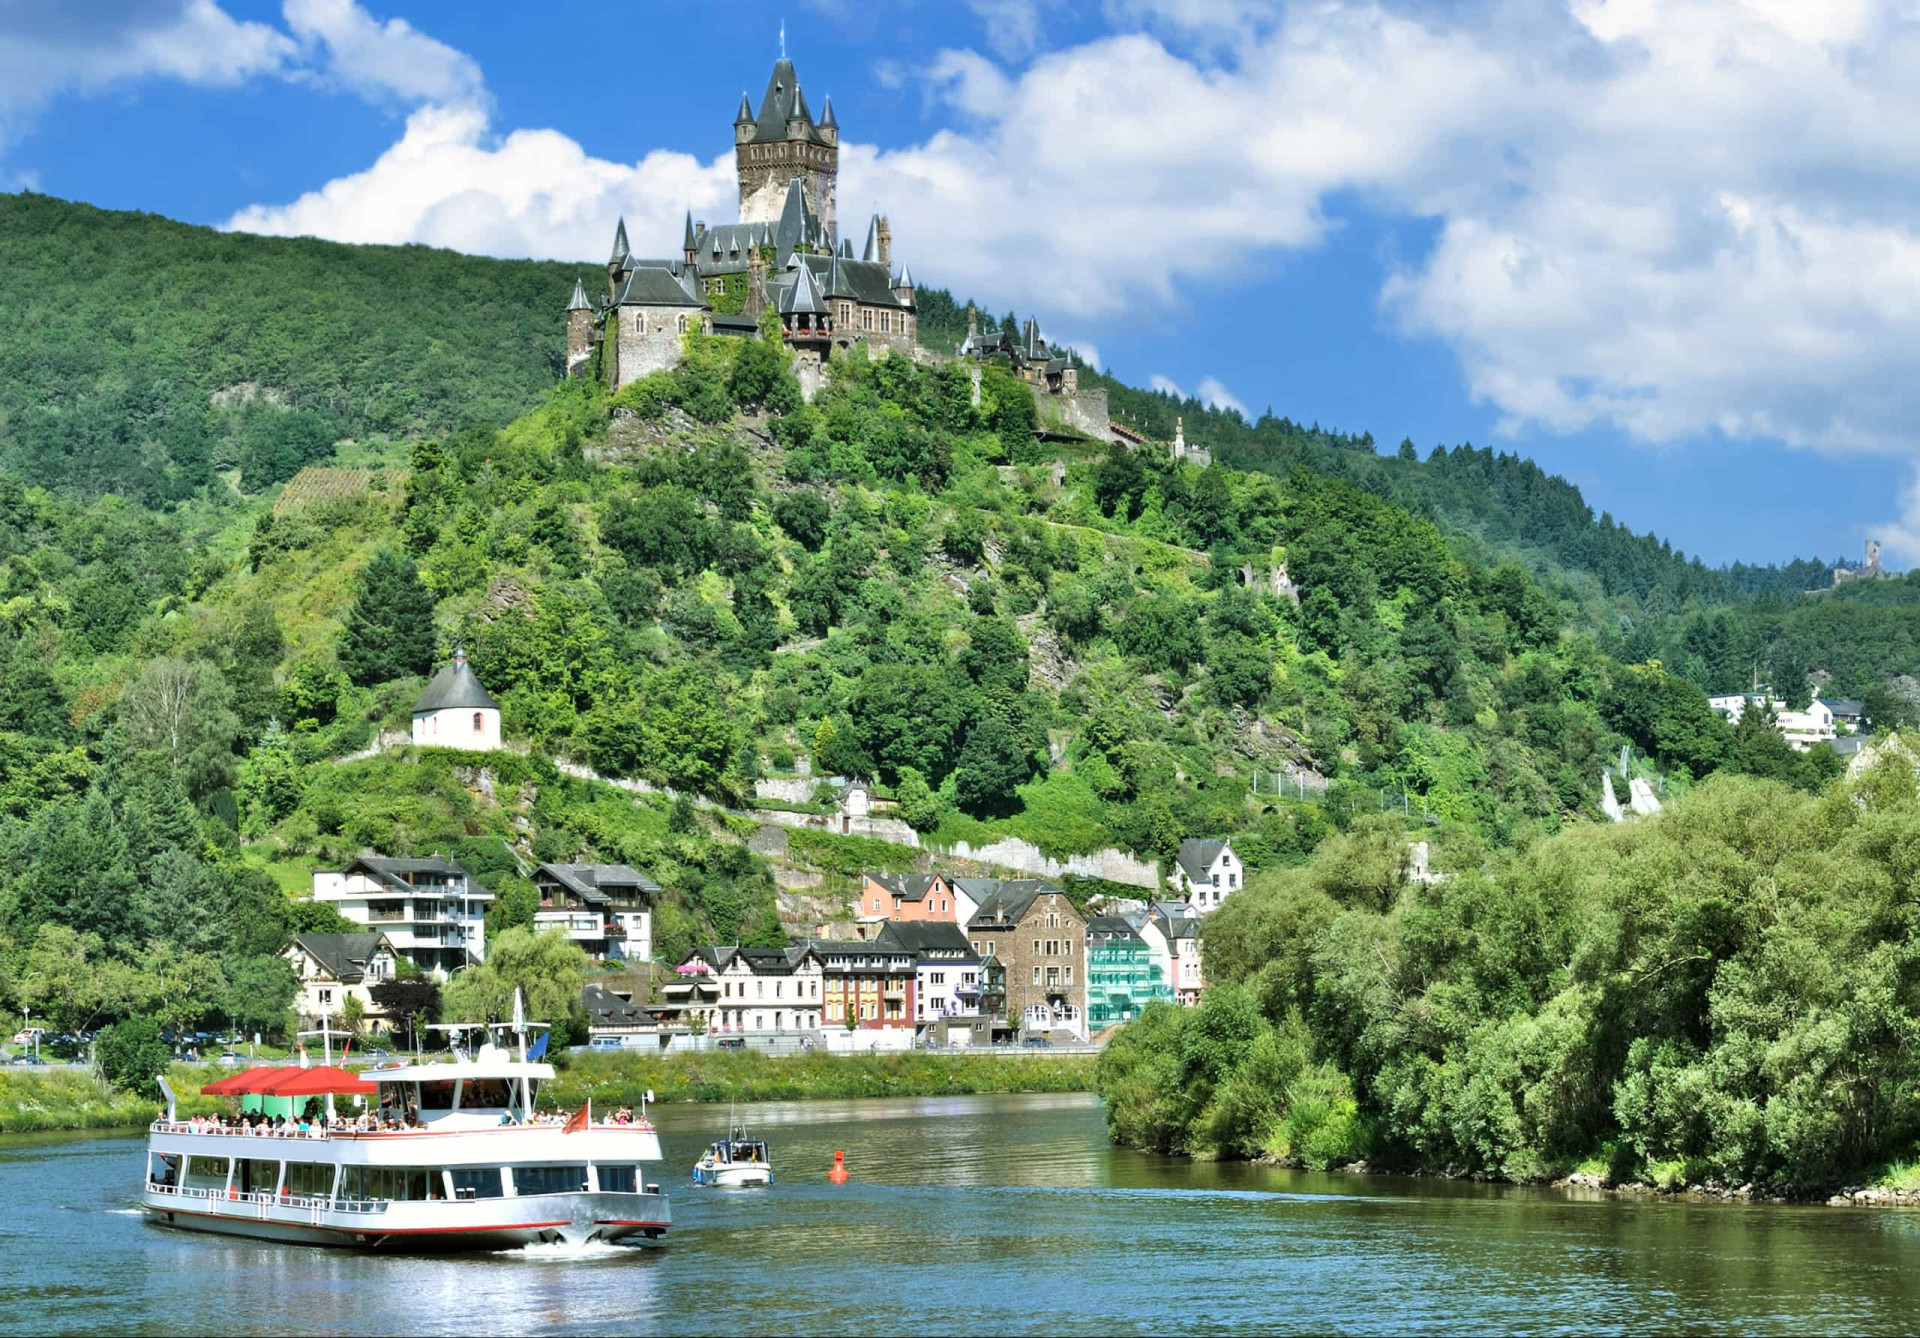 <p>The German section of the Mosel Valley lies between the Eifel and Hunsrück mountains. Wonderfully scenic, this 194-km (121 mi) pocket of land is characterized by a sprinkling of medieval villages, carefully-combed vineyards, and a wealth of wildlife, including the shy black stork.</p><p><a href="https://www.msn.com/en-us/community/channel/vid-7xx8mnucu55yw63we9va2gwr7uihbxwc68fxqp25x6tg4ftibpra?cvid=94631541bc0f4f89bfd59158d696ad7e">Follow us and access great exclusive content every day</a></p>